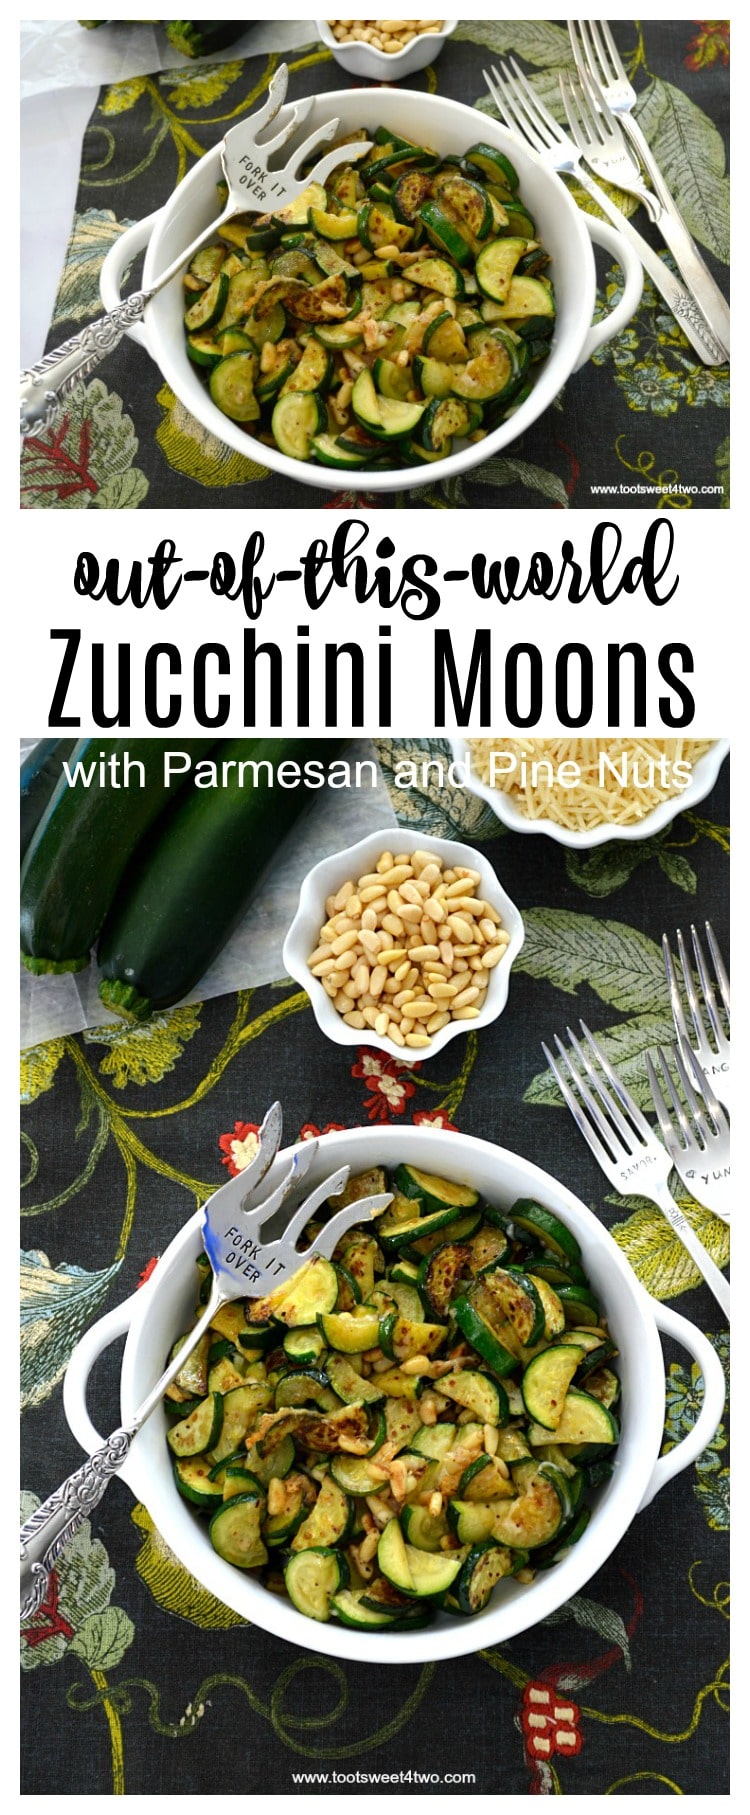 Zucchini cut into moons sauteed with Parmesan and pine nuts - one of the best zucchini recipes!